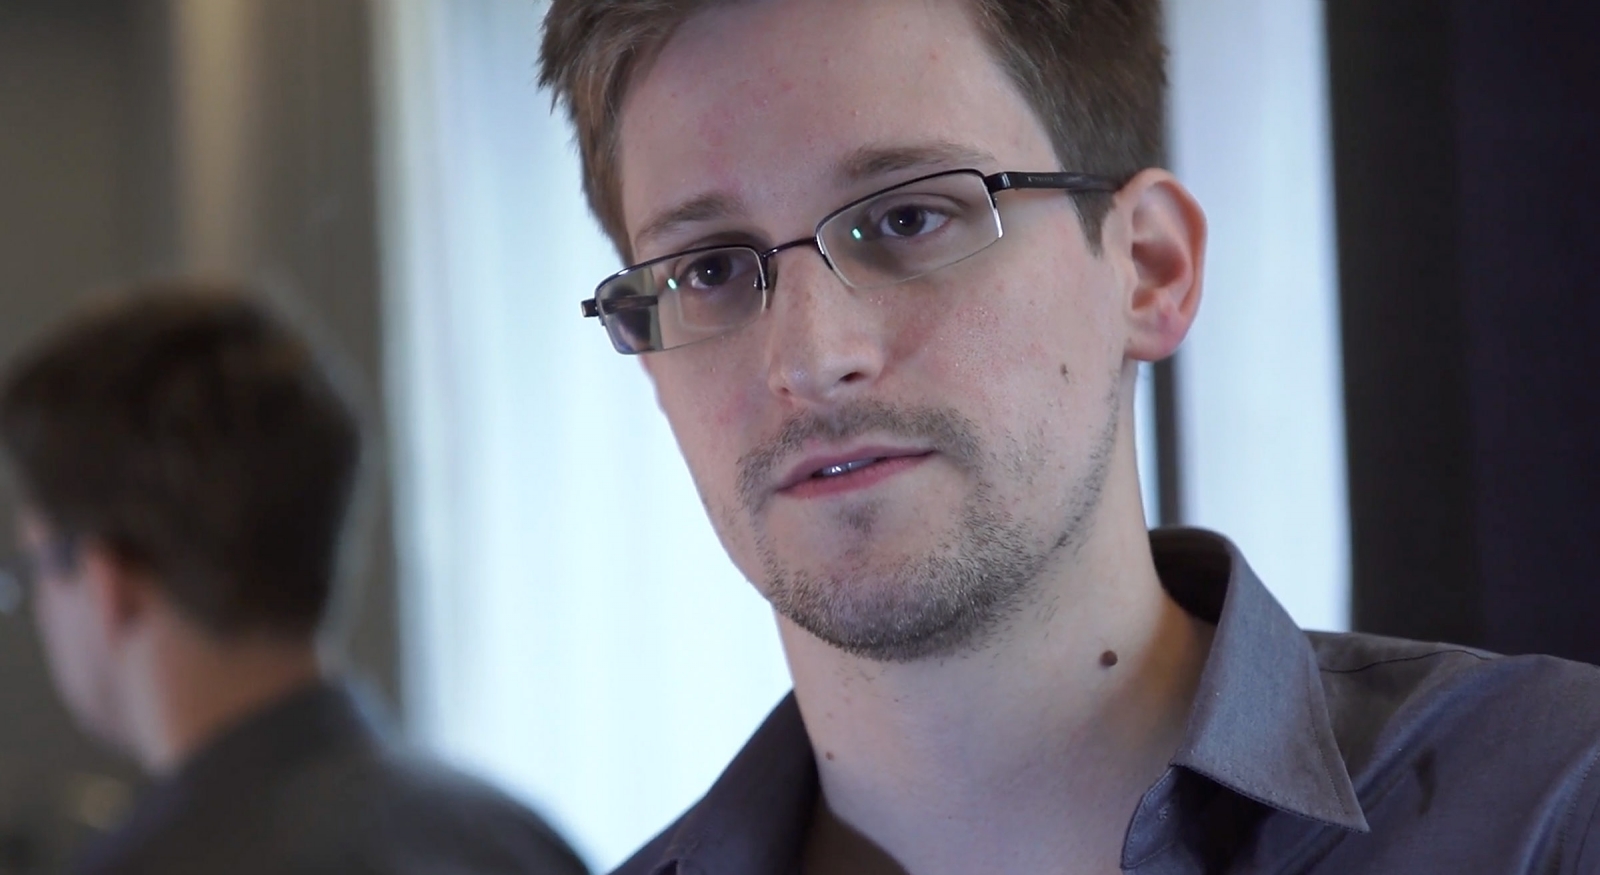 ACLU and human rights groups to launch campaign urging President Obama to pardon Edward Snowden